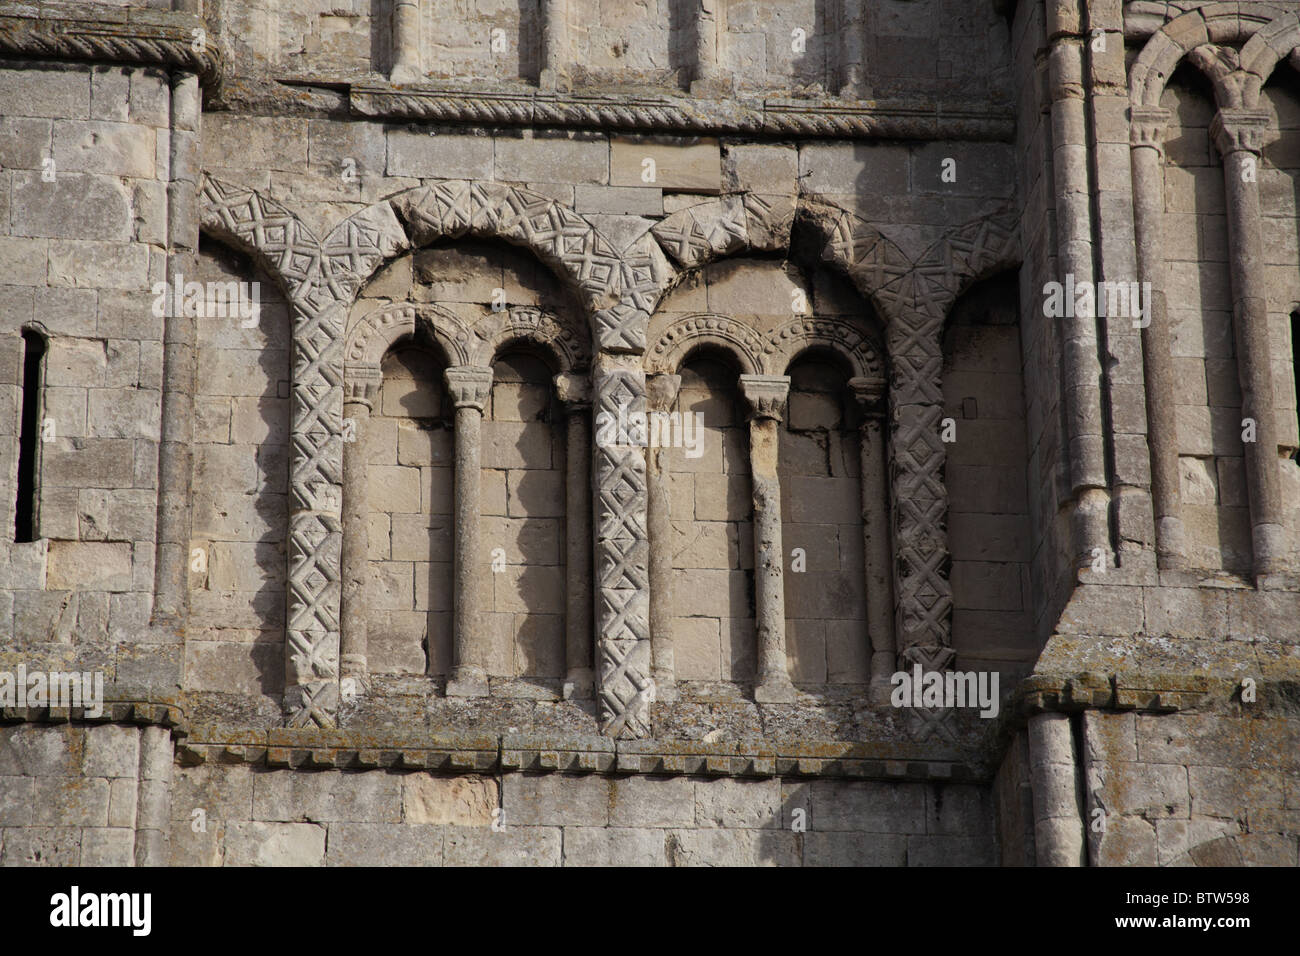 12th century Norman blind arches with diaper carving details on the tower Malmesbury Abbey, Wiltshire Stock Photo